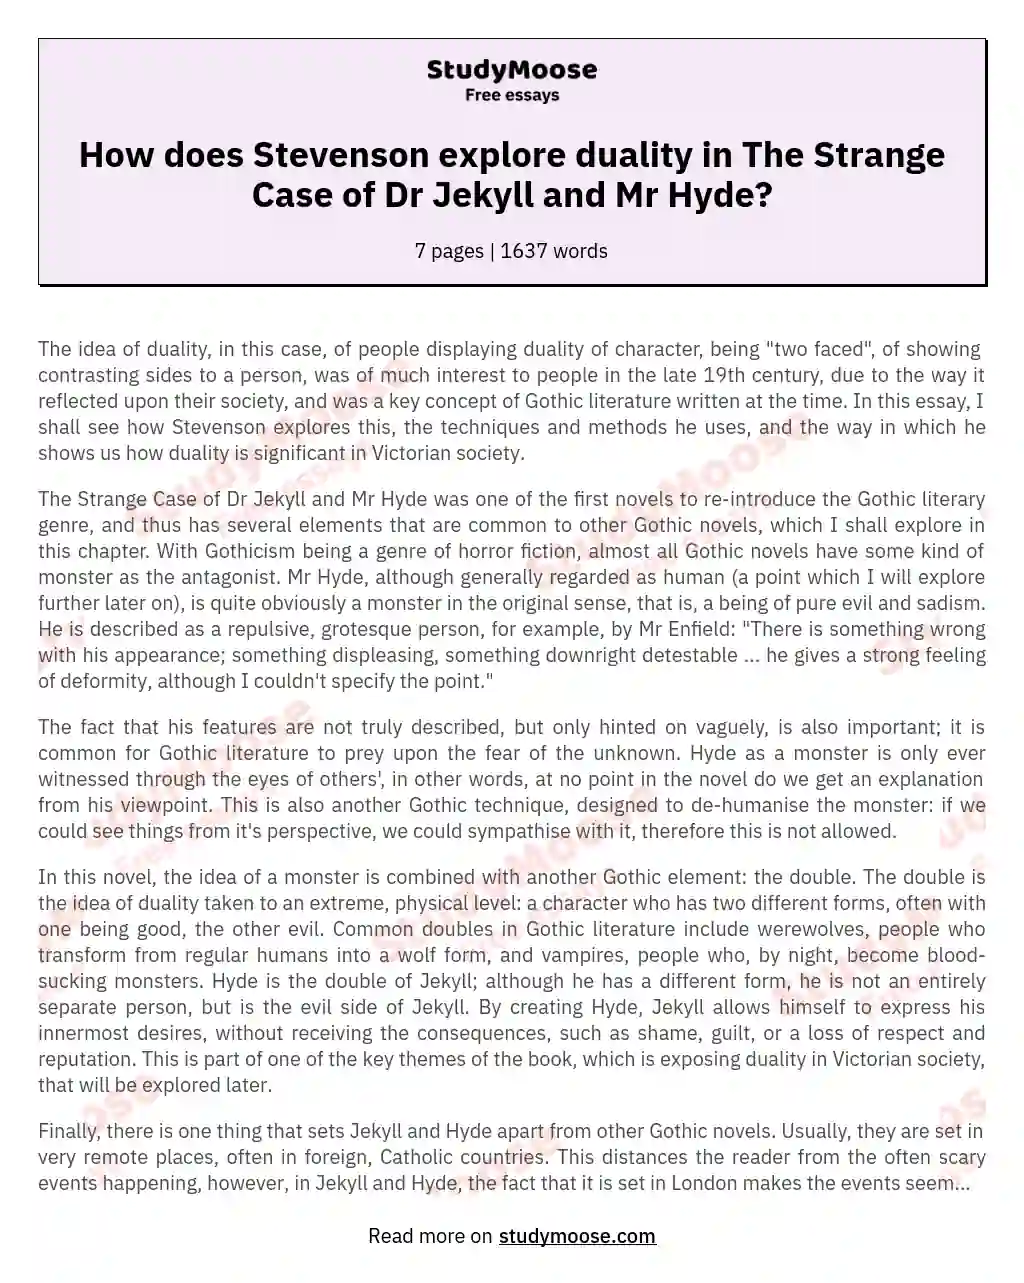 How does Stevenson explore duality in The Strange Case of Dr Jekyll and Mr Hyde?